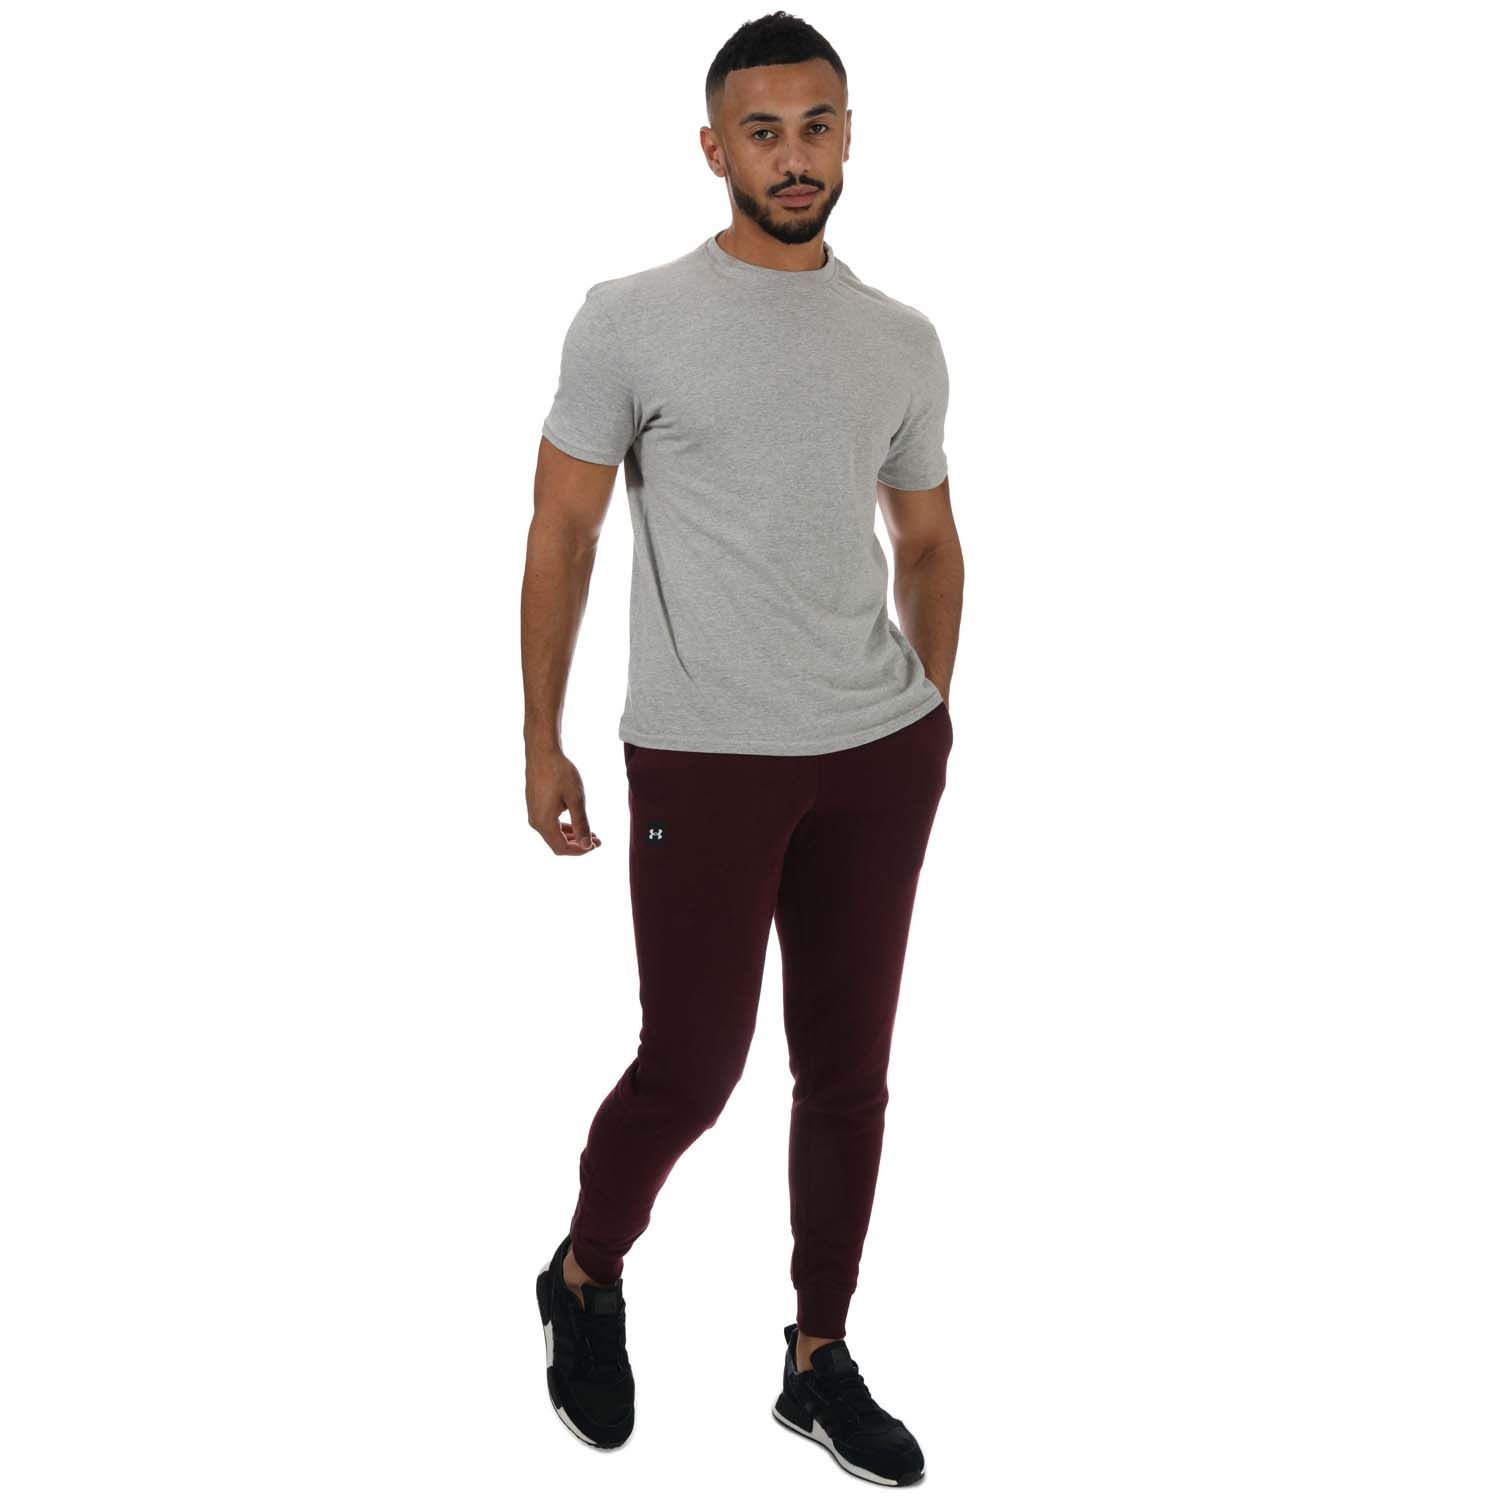 Mens Under Armour Rival Fleece Joggers in burgundy.- Encased elastic waistband with external drawcord.- Open hand pockets & secure.- Snap back pocket.- Ribbed cuffs.- Ultra-soft  mid-weight cotton-blend fleece with brushed interior for extra warmth.- Tapered leg fit- Main Material: 80% Cotton  20% Polyester. Machine washable.- Ref: 1357128600